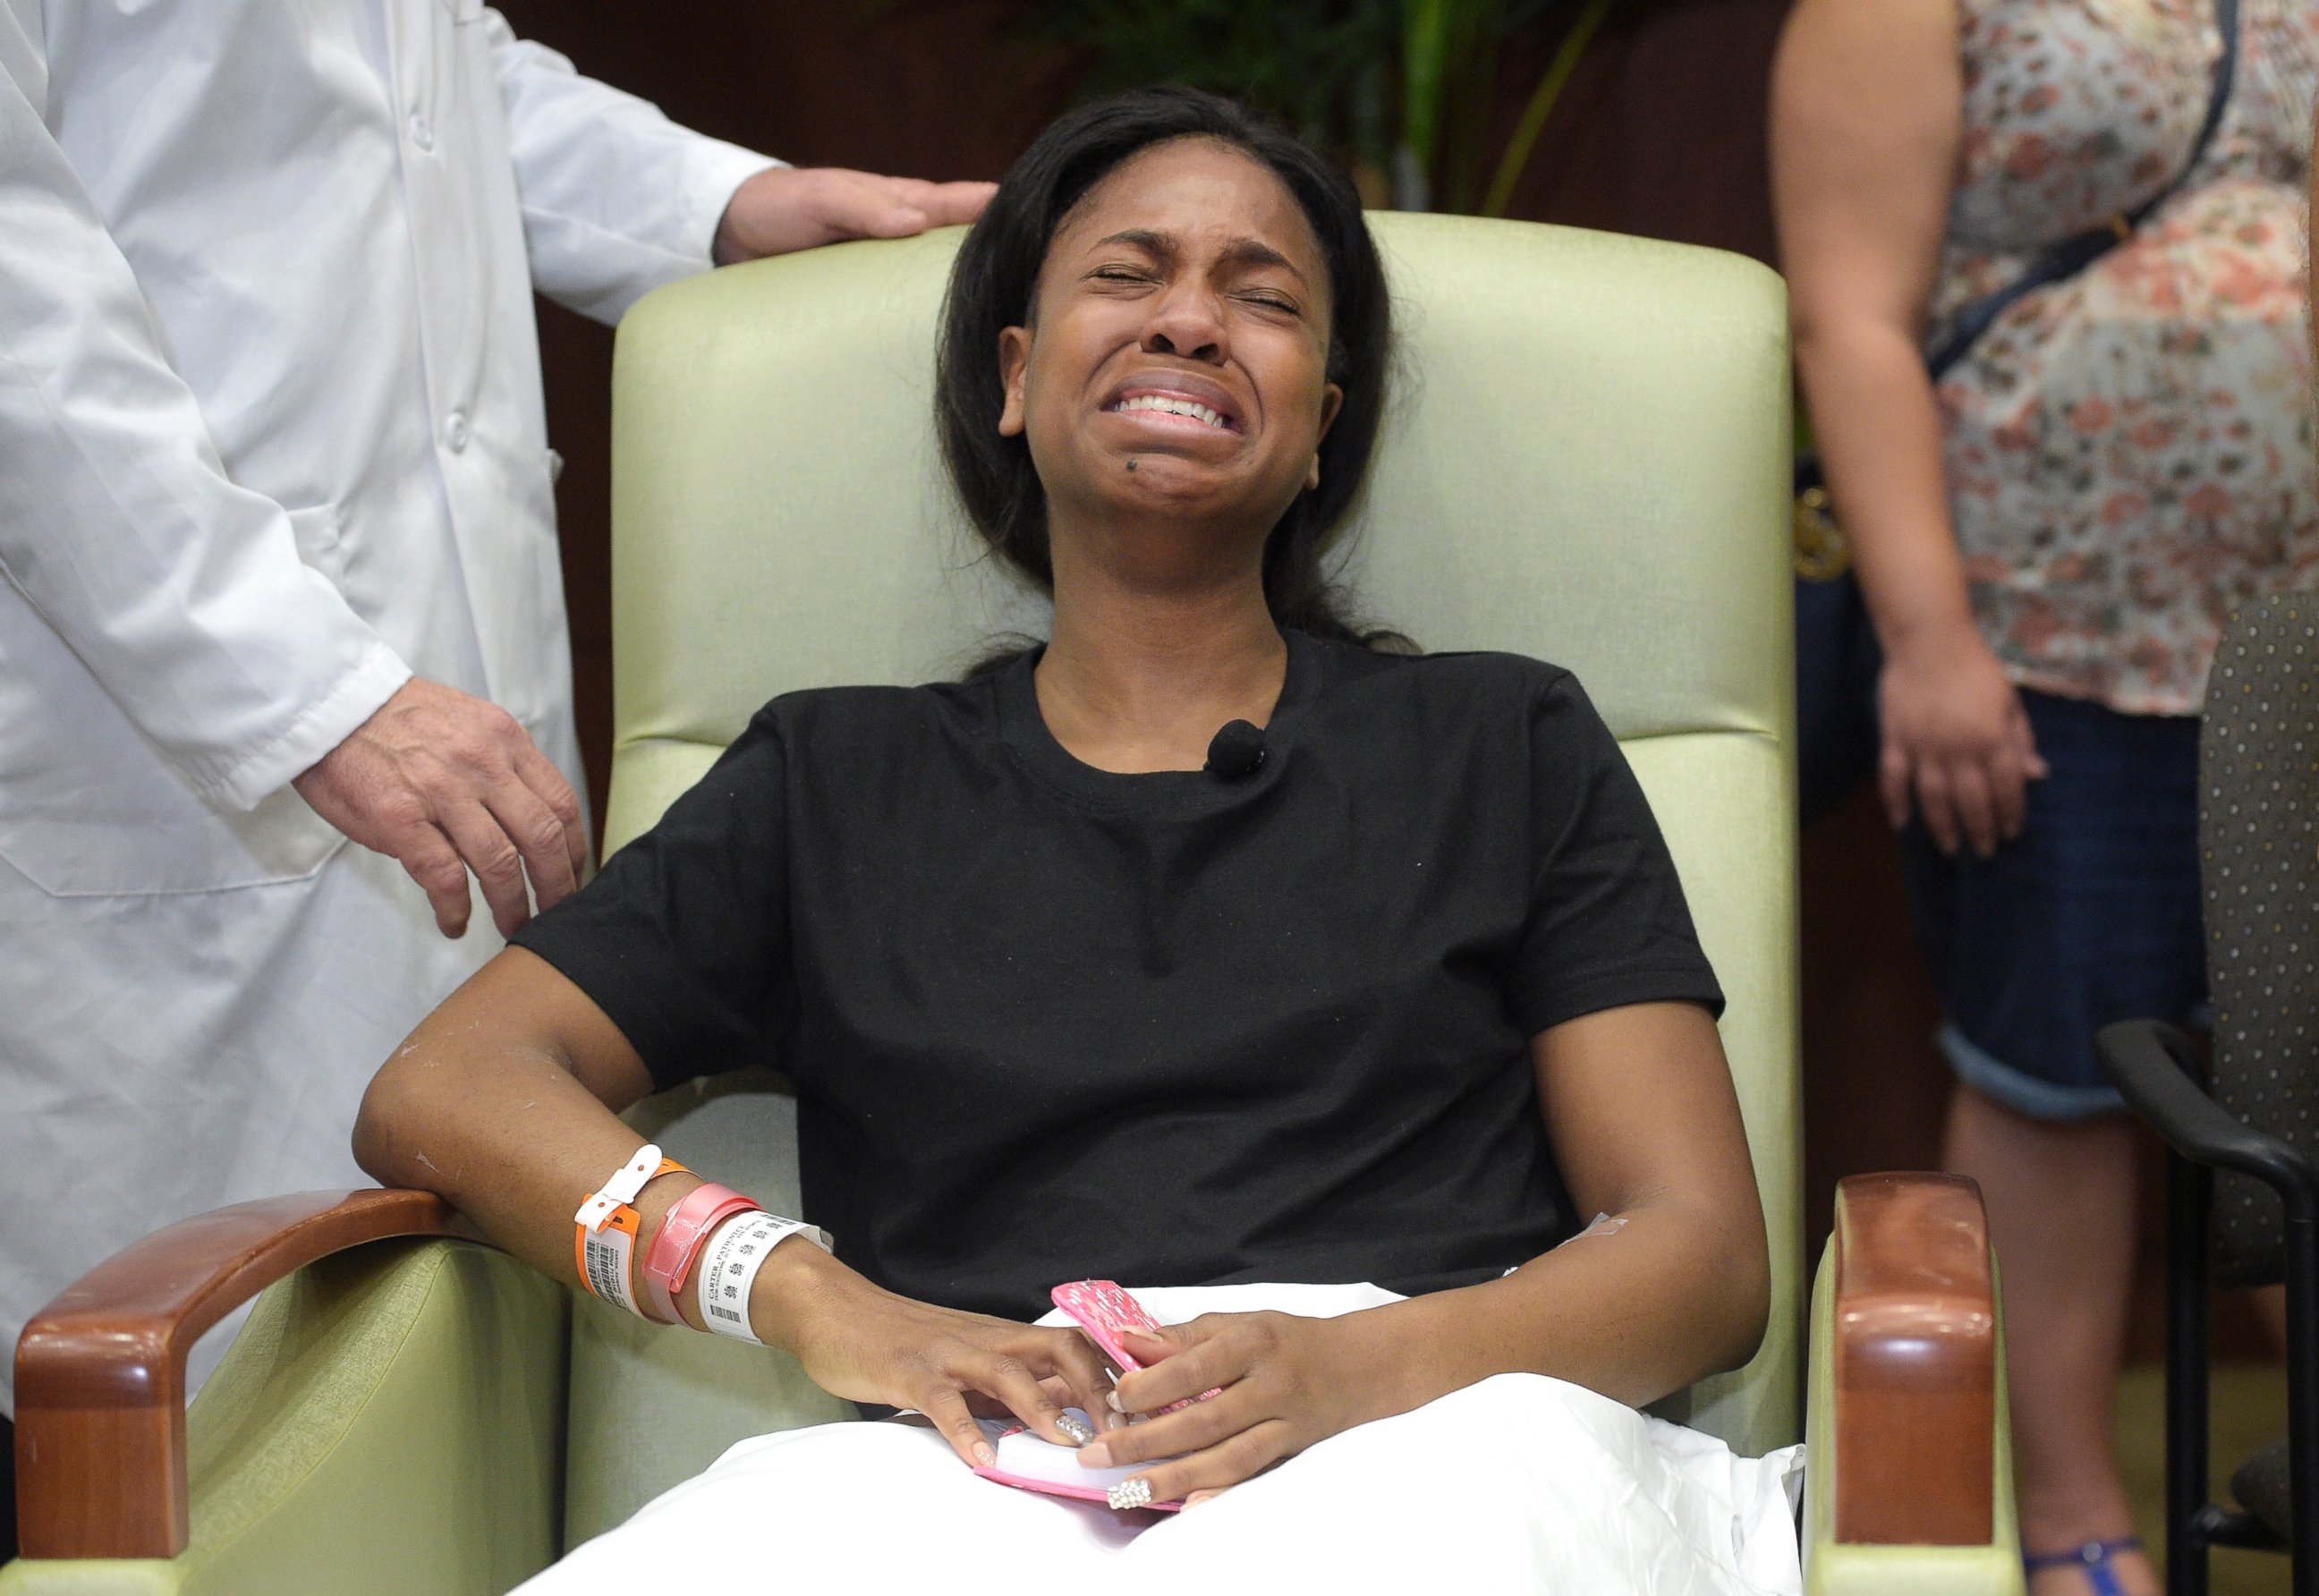 PHOTO: Patience Carter, a victim in the Pulse nightclub shooting from Philadelphia, becomes emotional after giving her story during a news conference at Florida Hospital Orlando, June 14, 2016, in Orlando, F